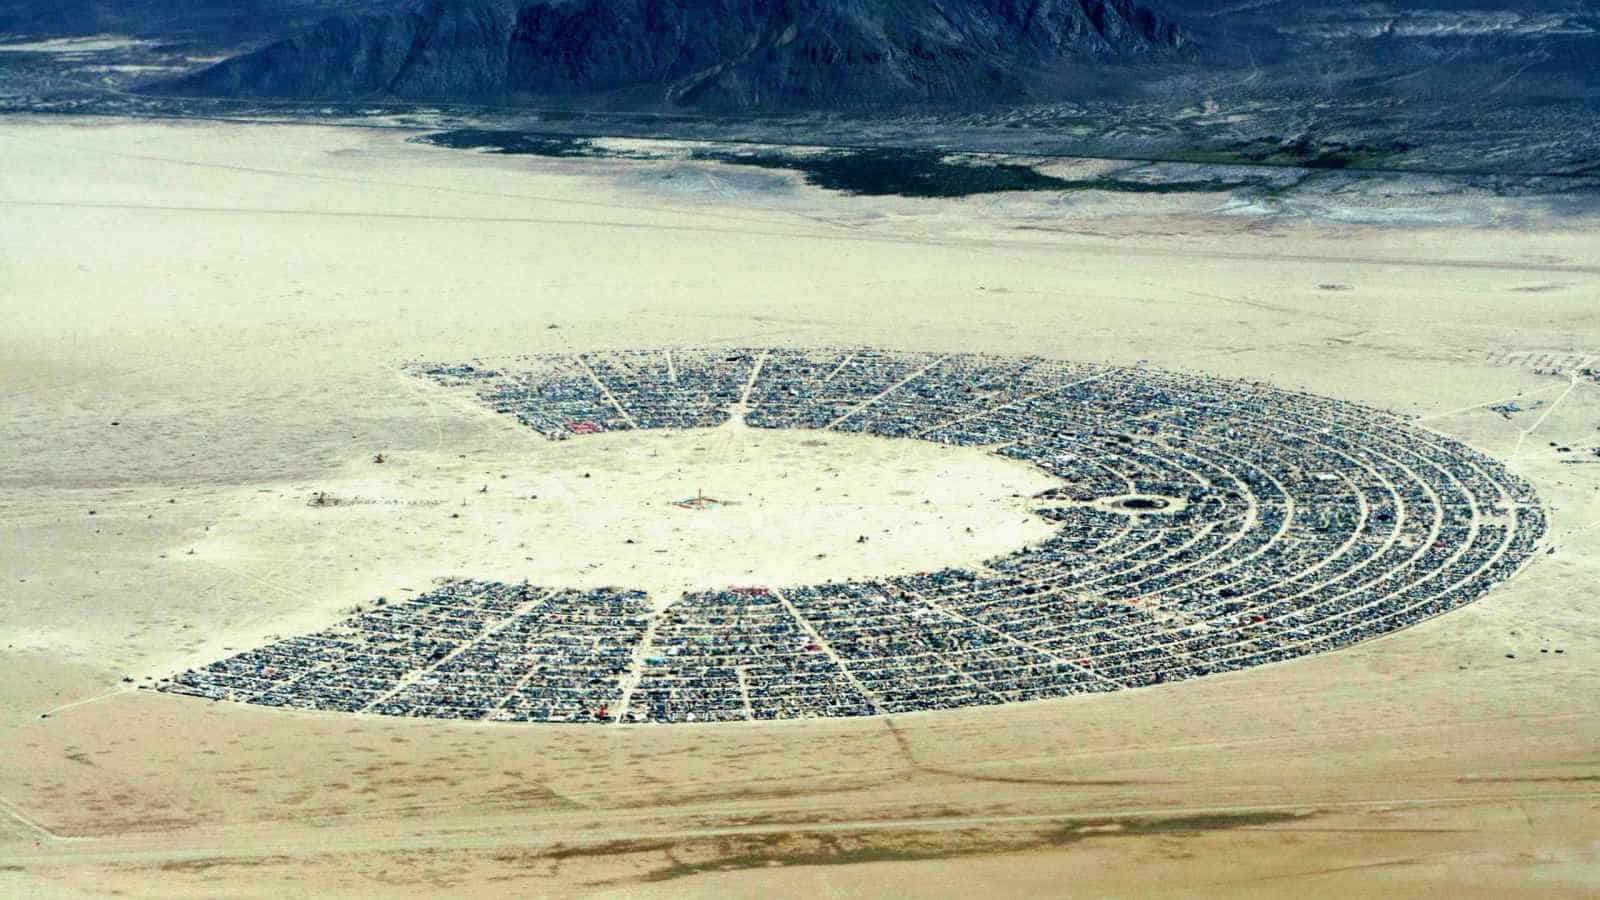 Burning Man attendees halted by climate activists